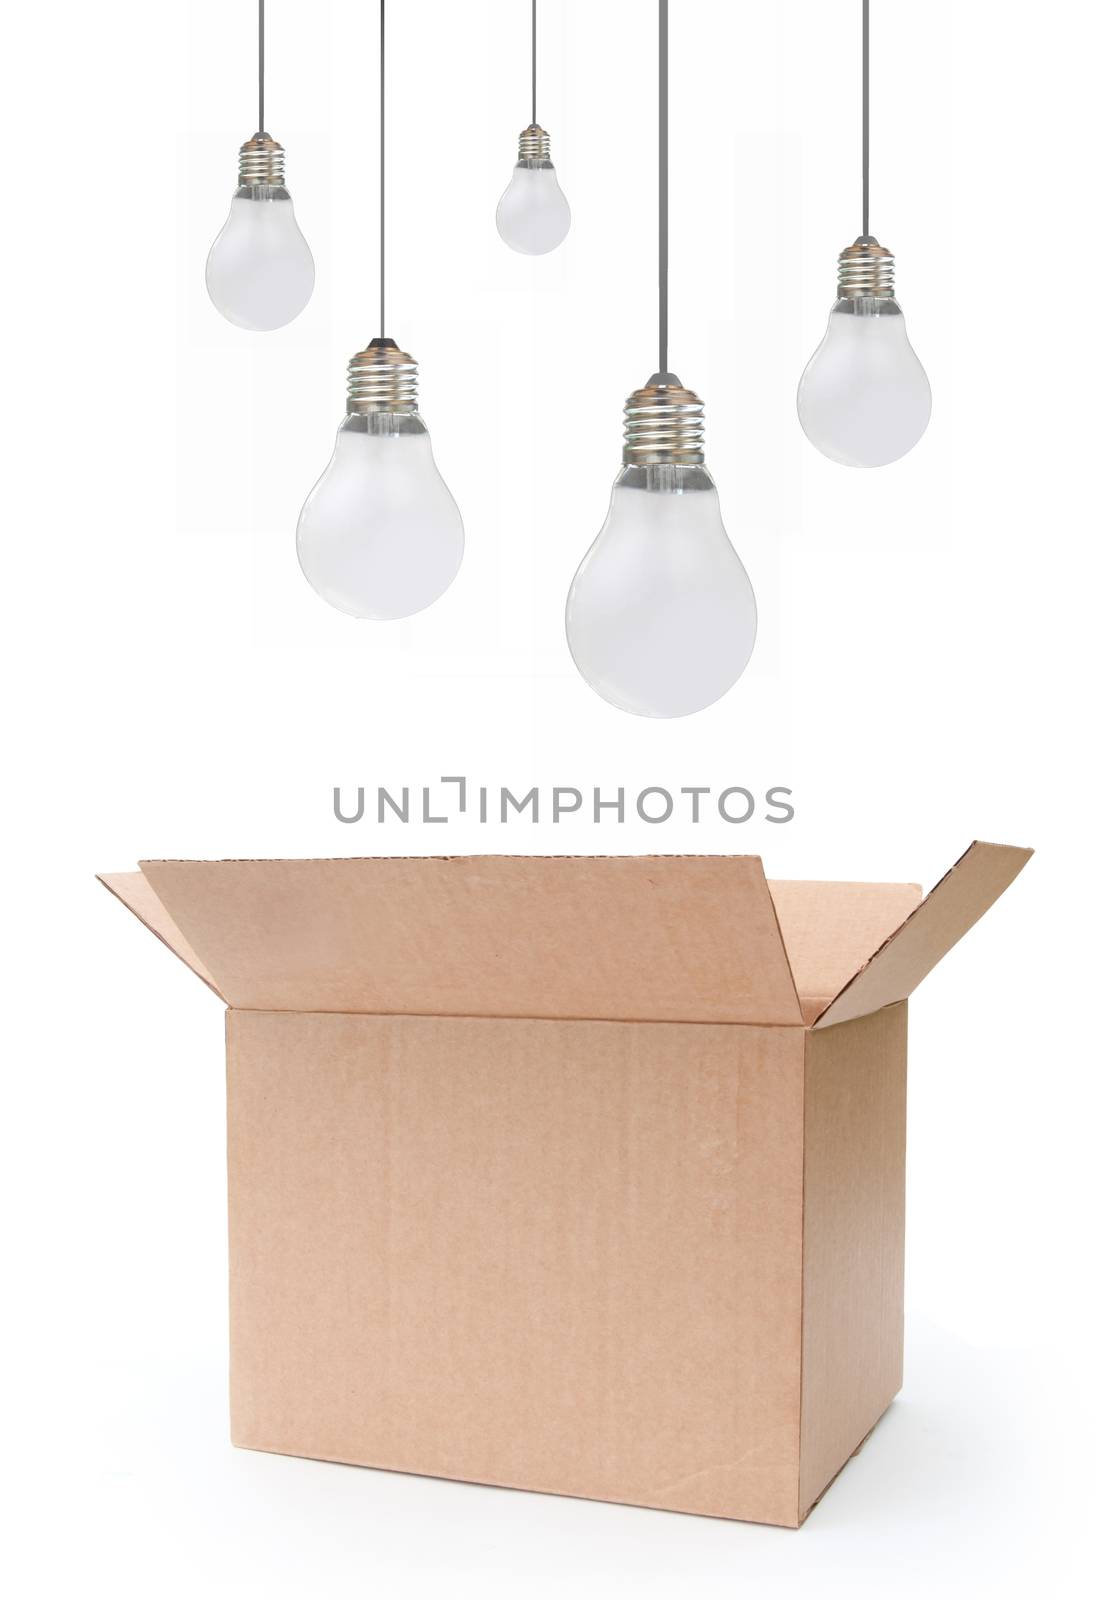 Light bulbs hovering over an open box 